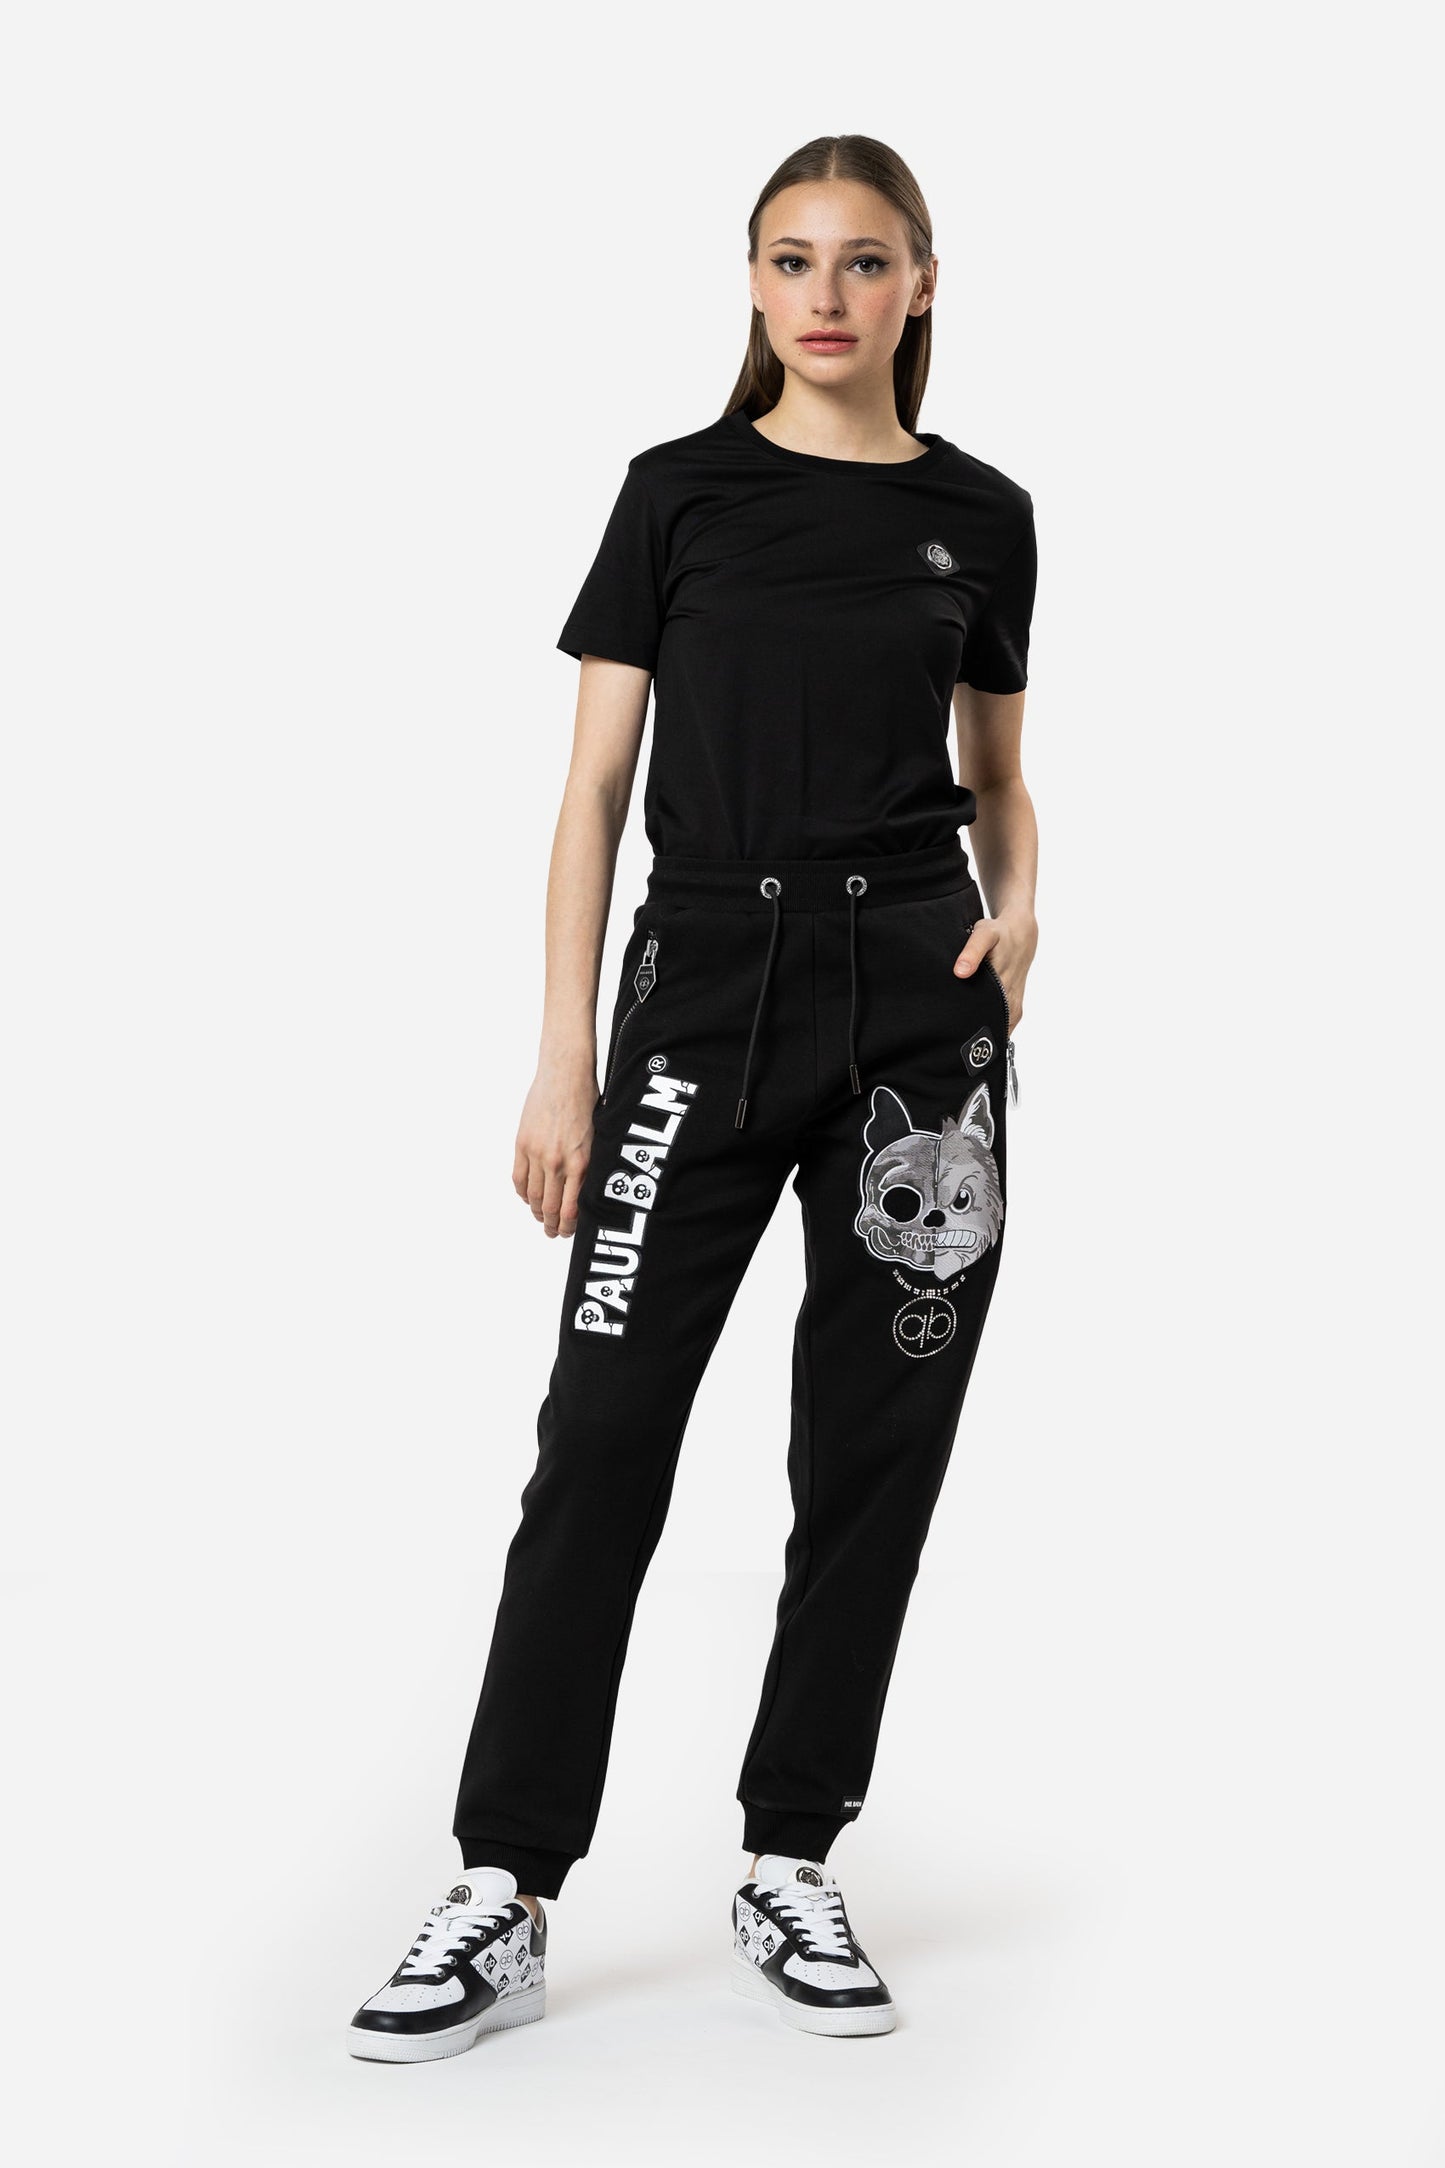 Scull Embroidery Pants - Limited to 300